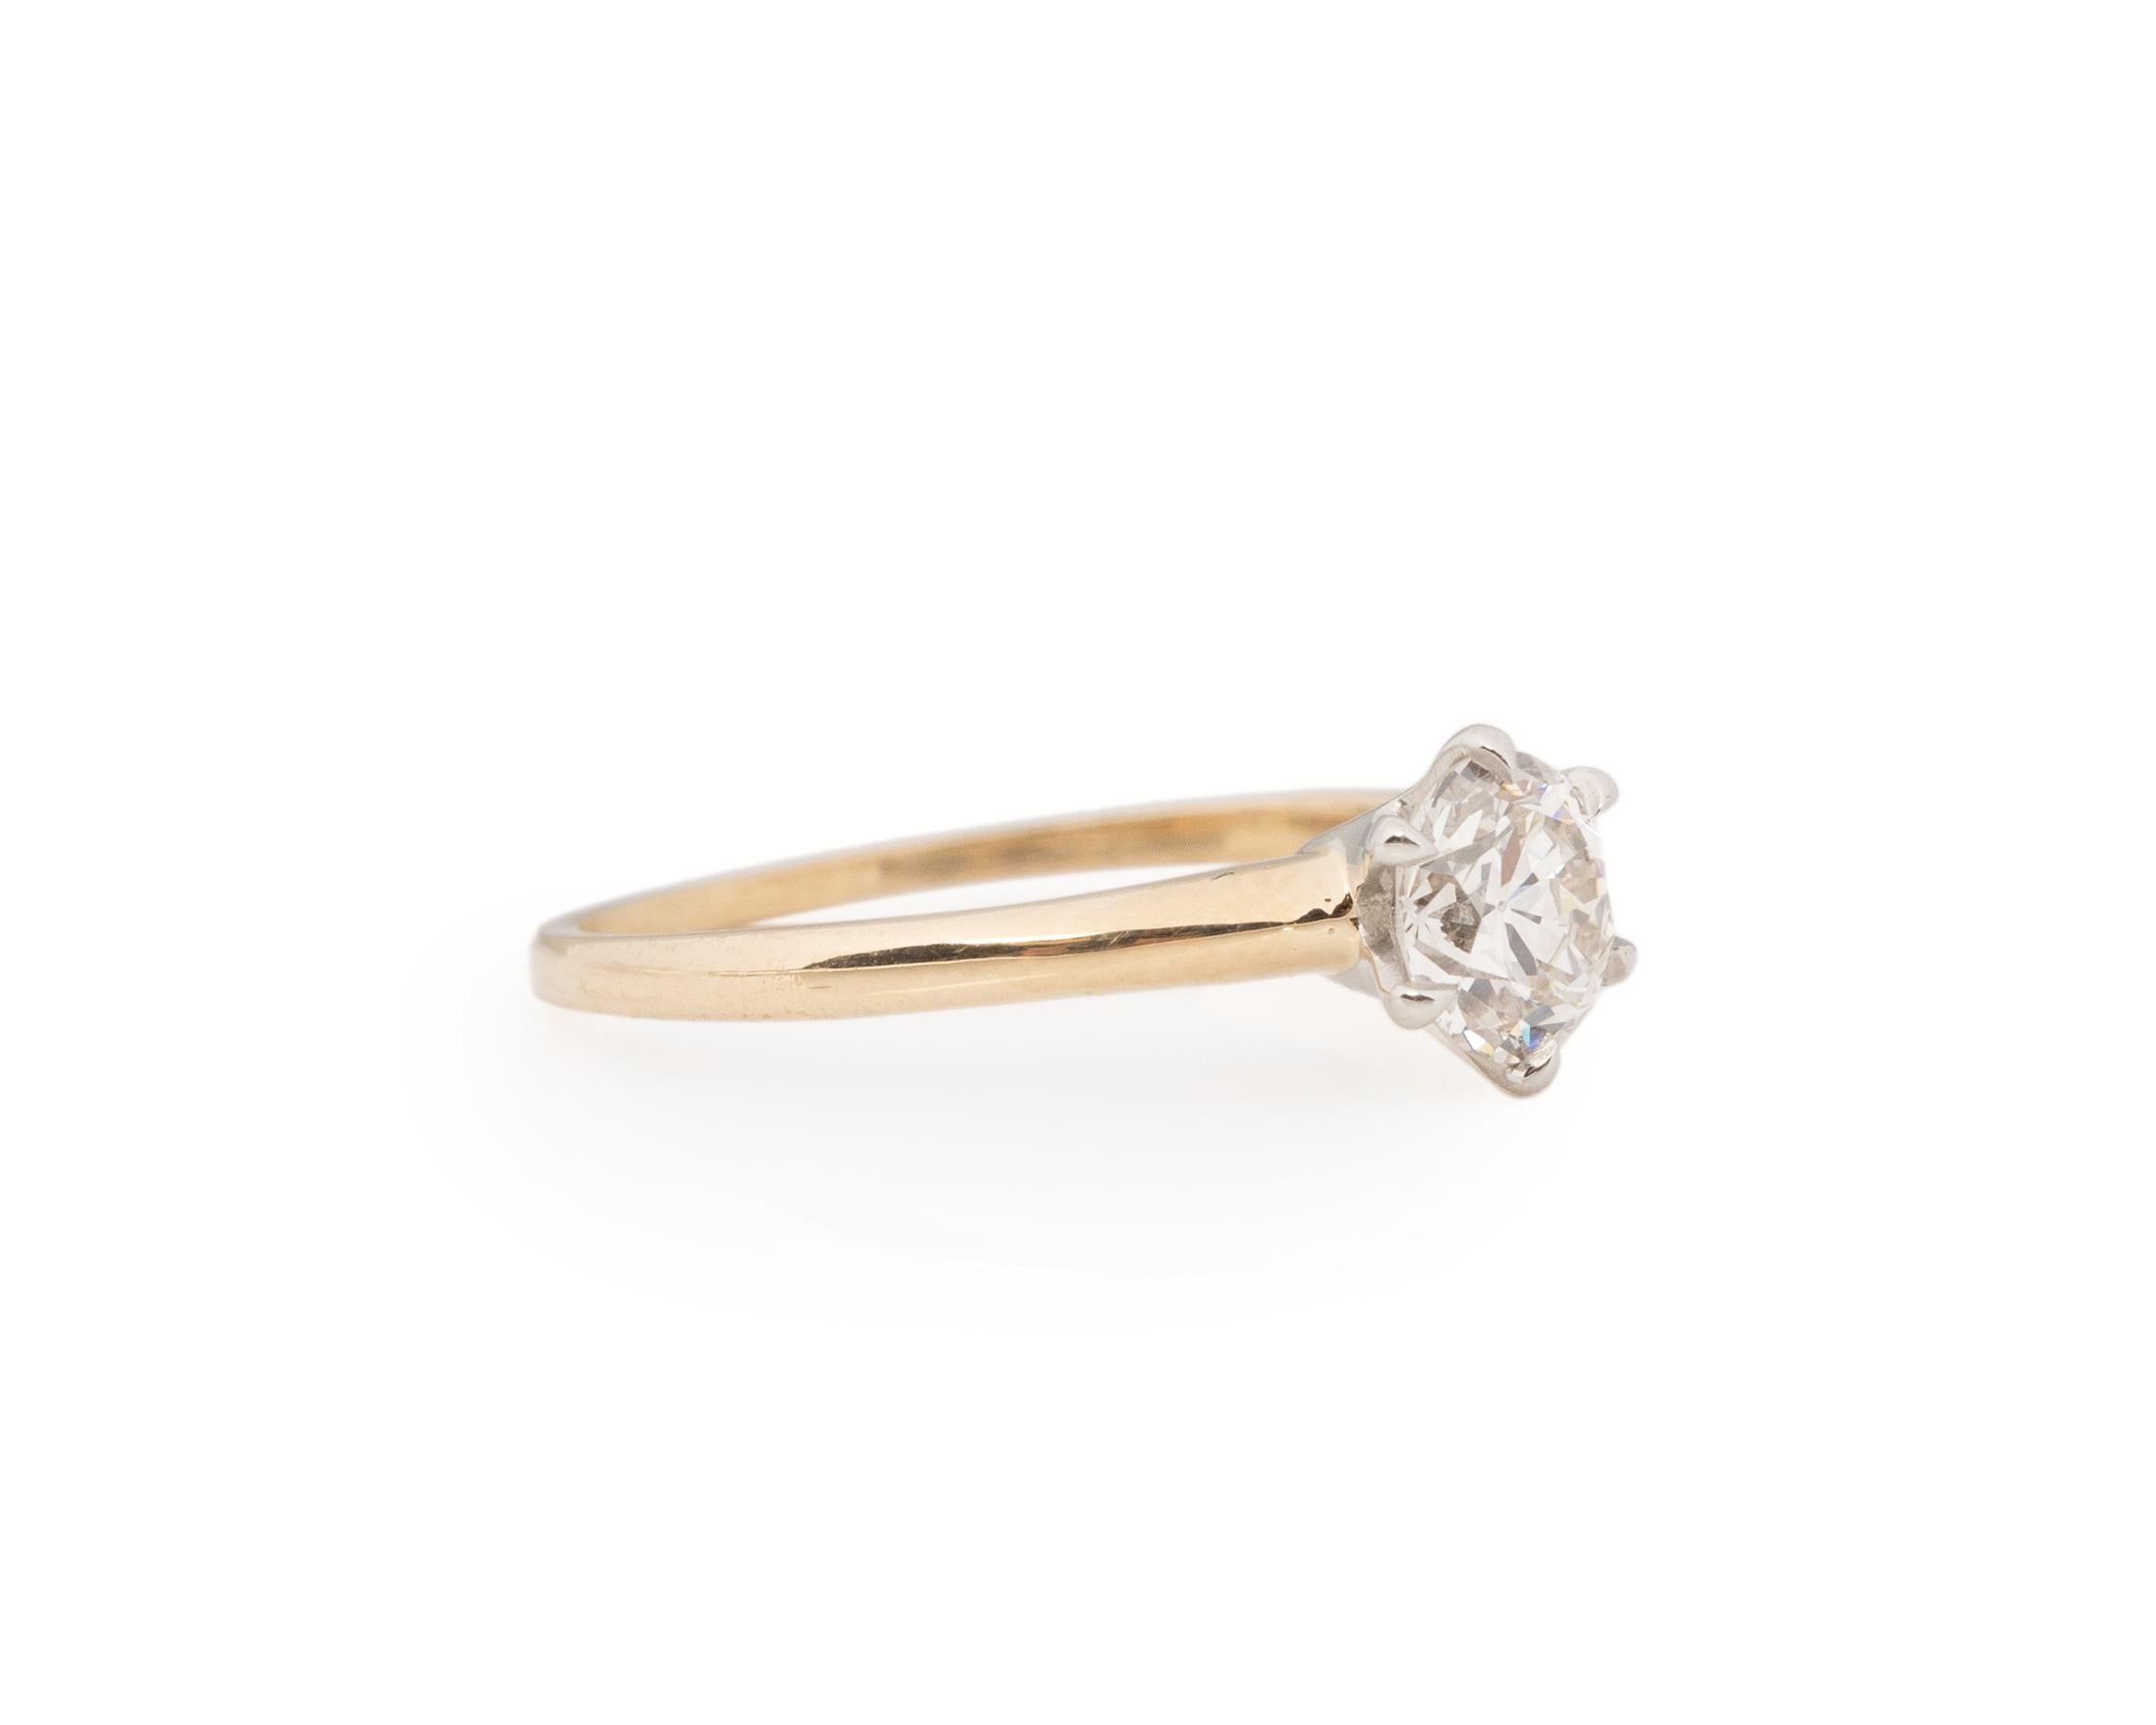 Item Details:
Ring Size: 6.75
Metal Type: 14K Yellow Gold and Platinum [Hallmarked, and Tested]
Weight: 1.9 grams
Center Diamond Details:
Weight: .35ct
Cut: Old European brilliant
Color: H
Clarity: VS
Finger to Top of Stone Measurement: